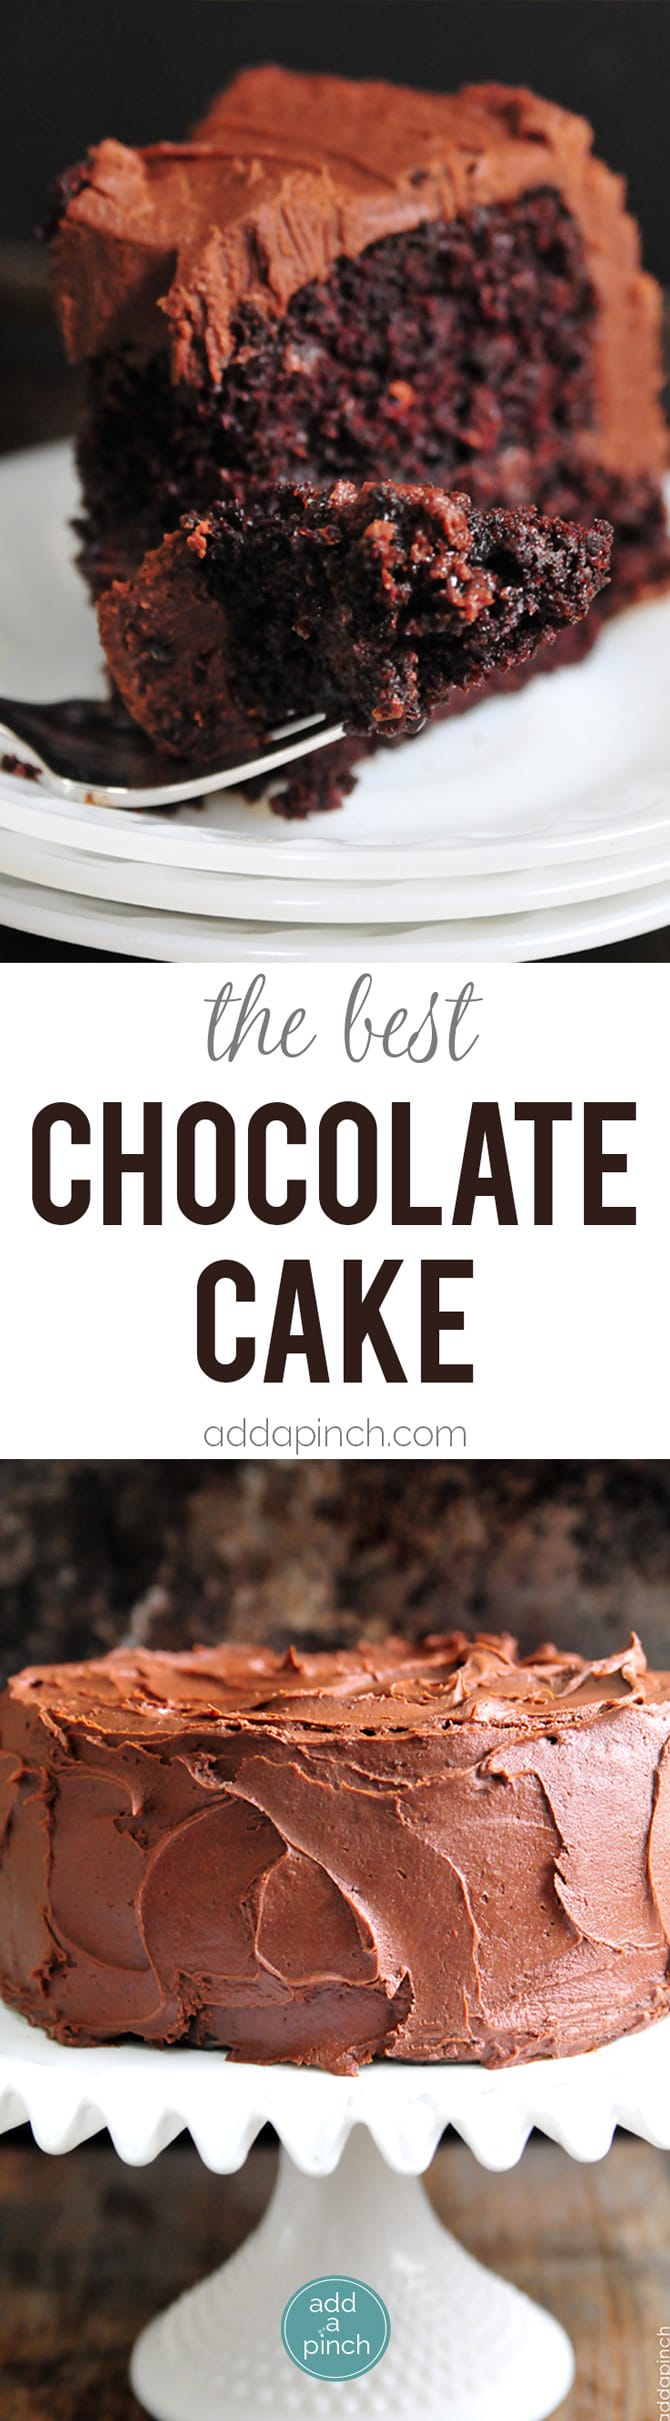 The Best Chocolate Cake recipe with decadent Chocolate Frosting that will quickly become your favorite! // addapinch.com